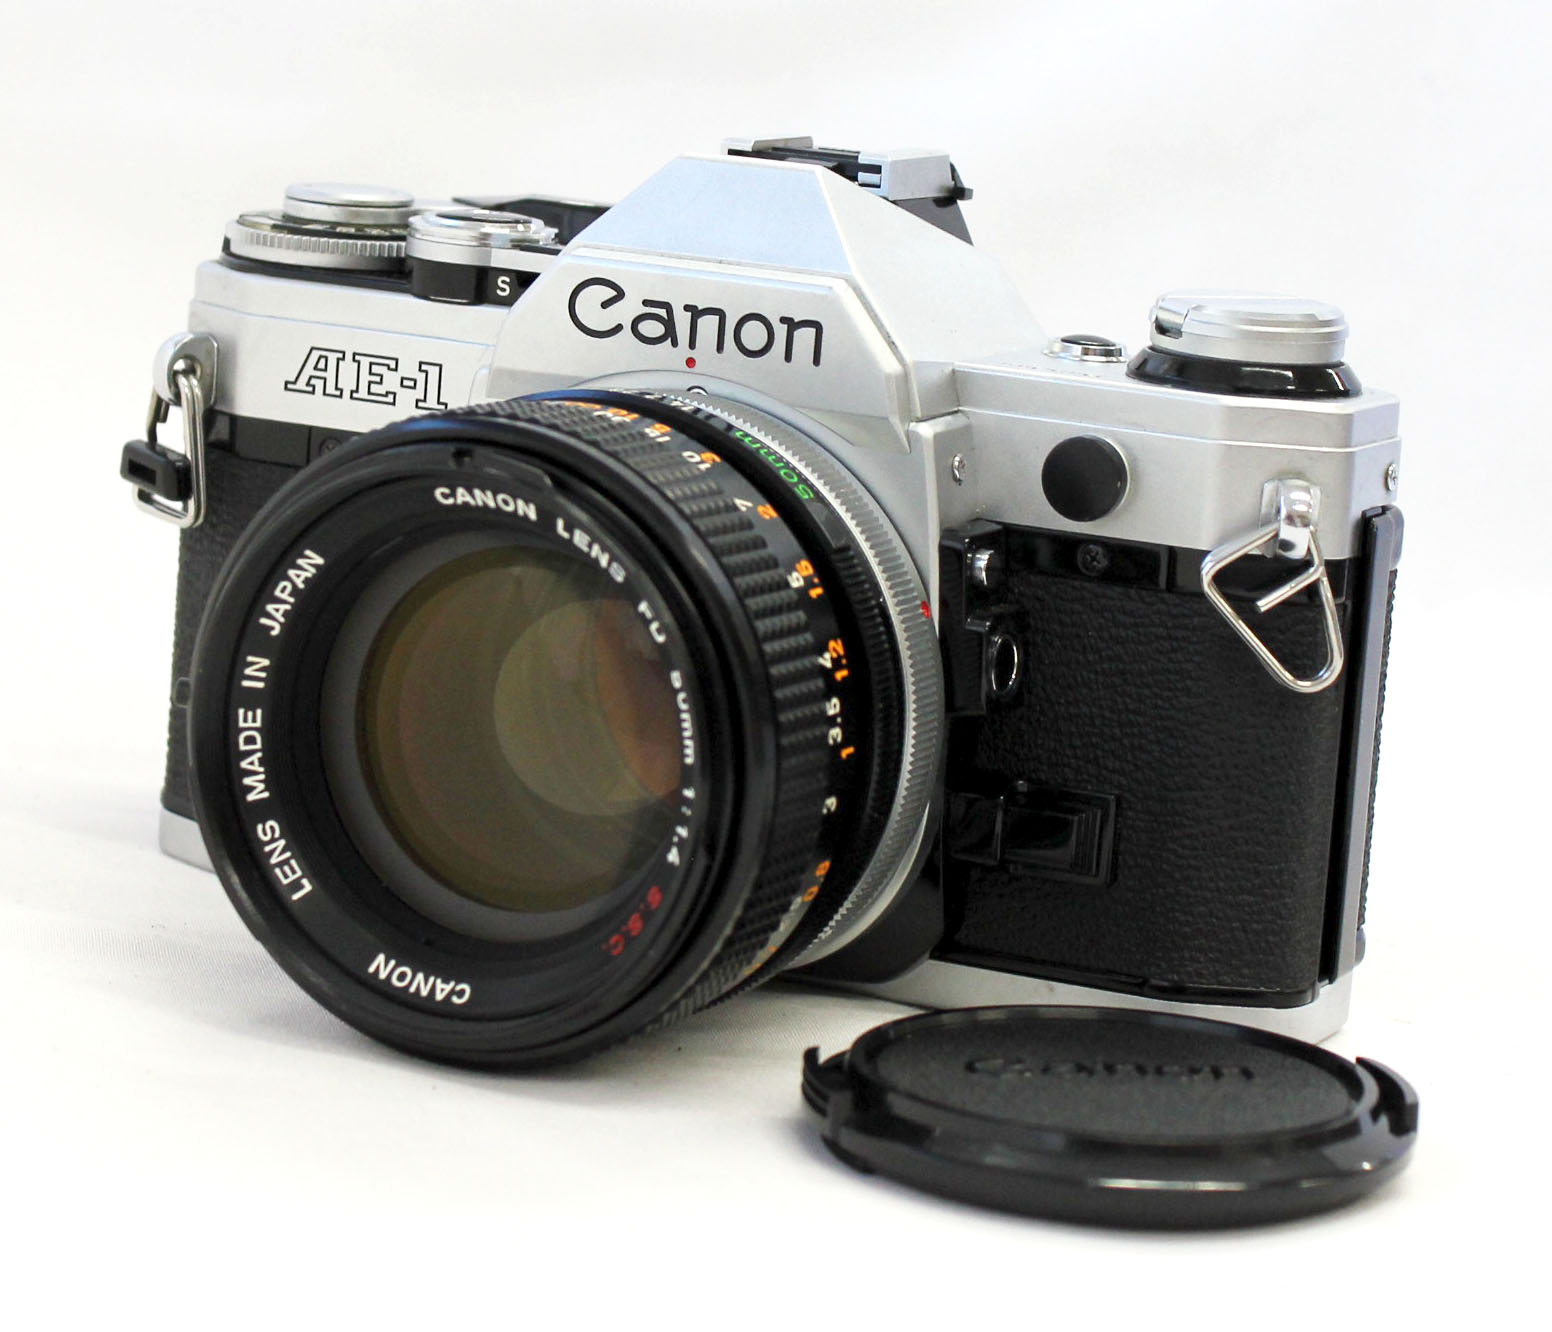 Japan Used Camera Shop | [Excellent++++] Canon AE-1 35mm SLR Camera with FD 50mm F/1.4 S.S.C. Lens from Japan